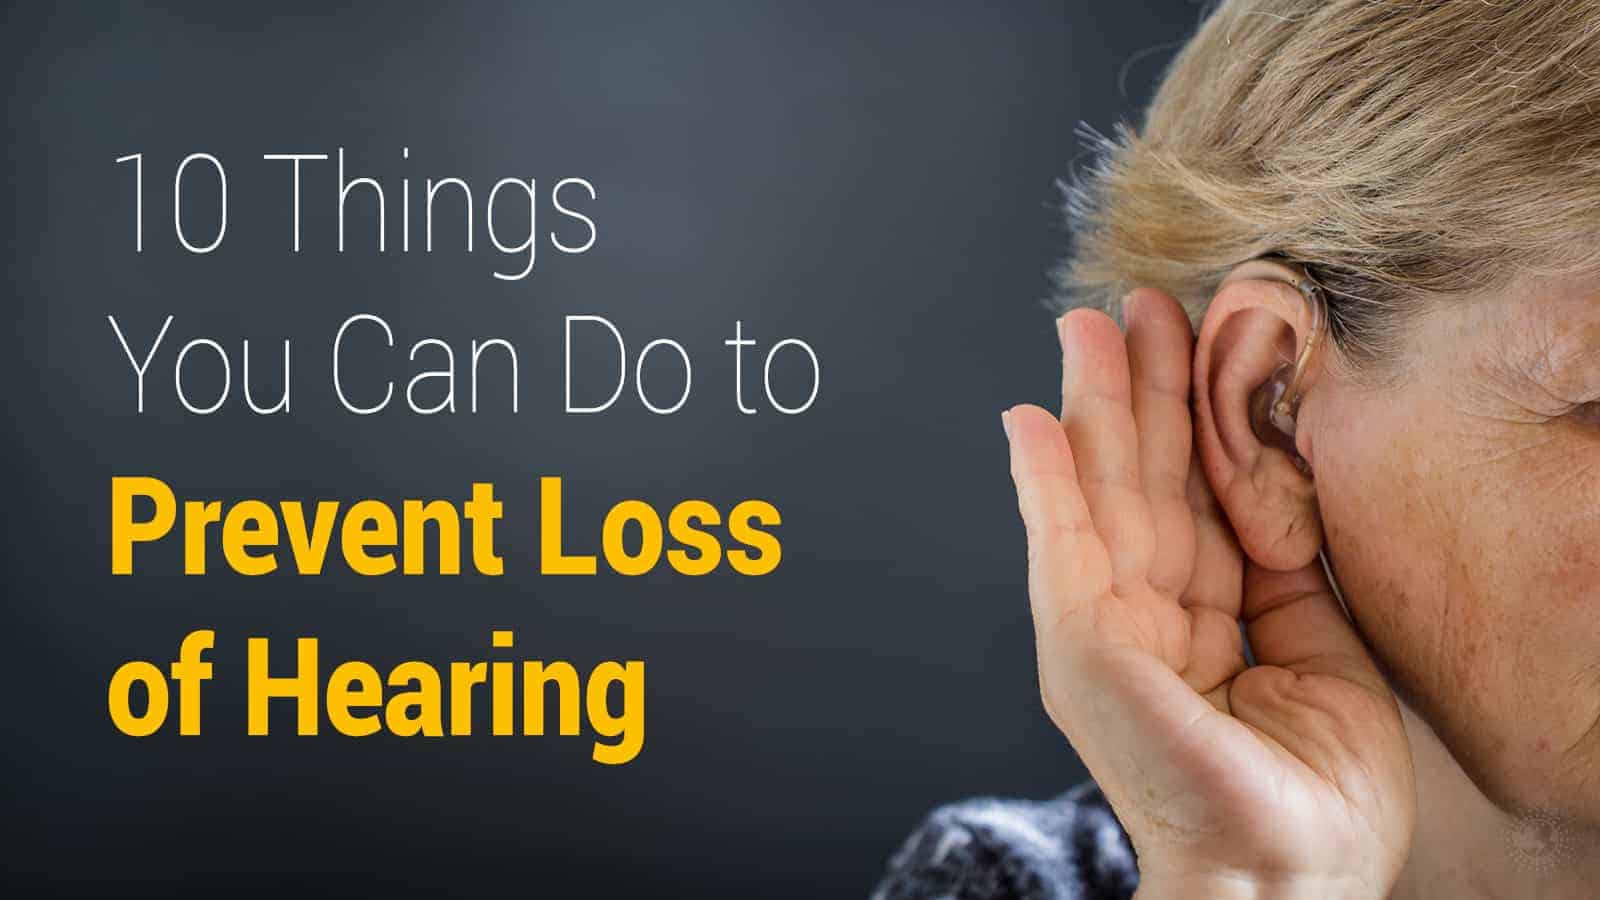 10 things you can do to prevent loss of hearing